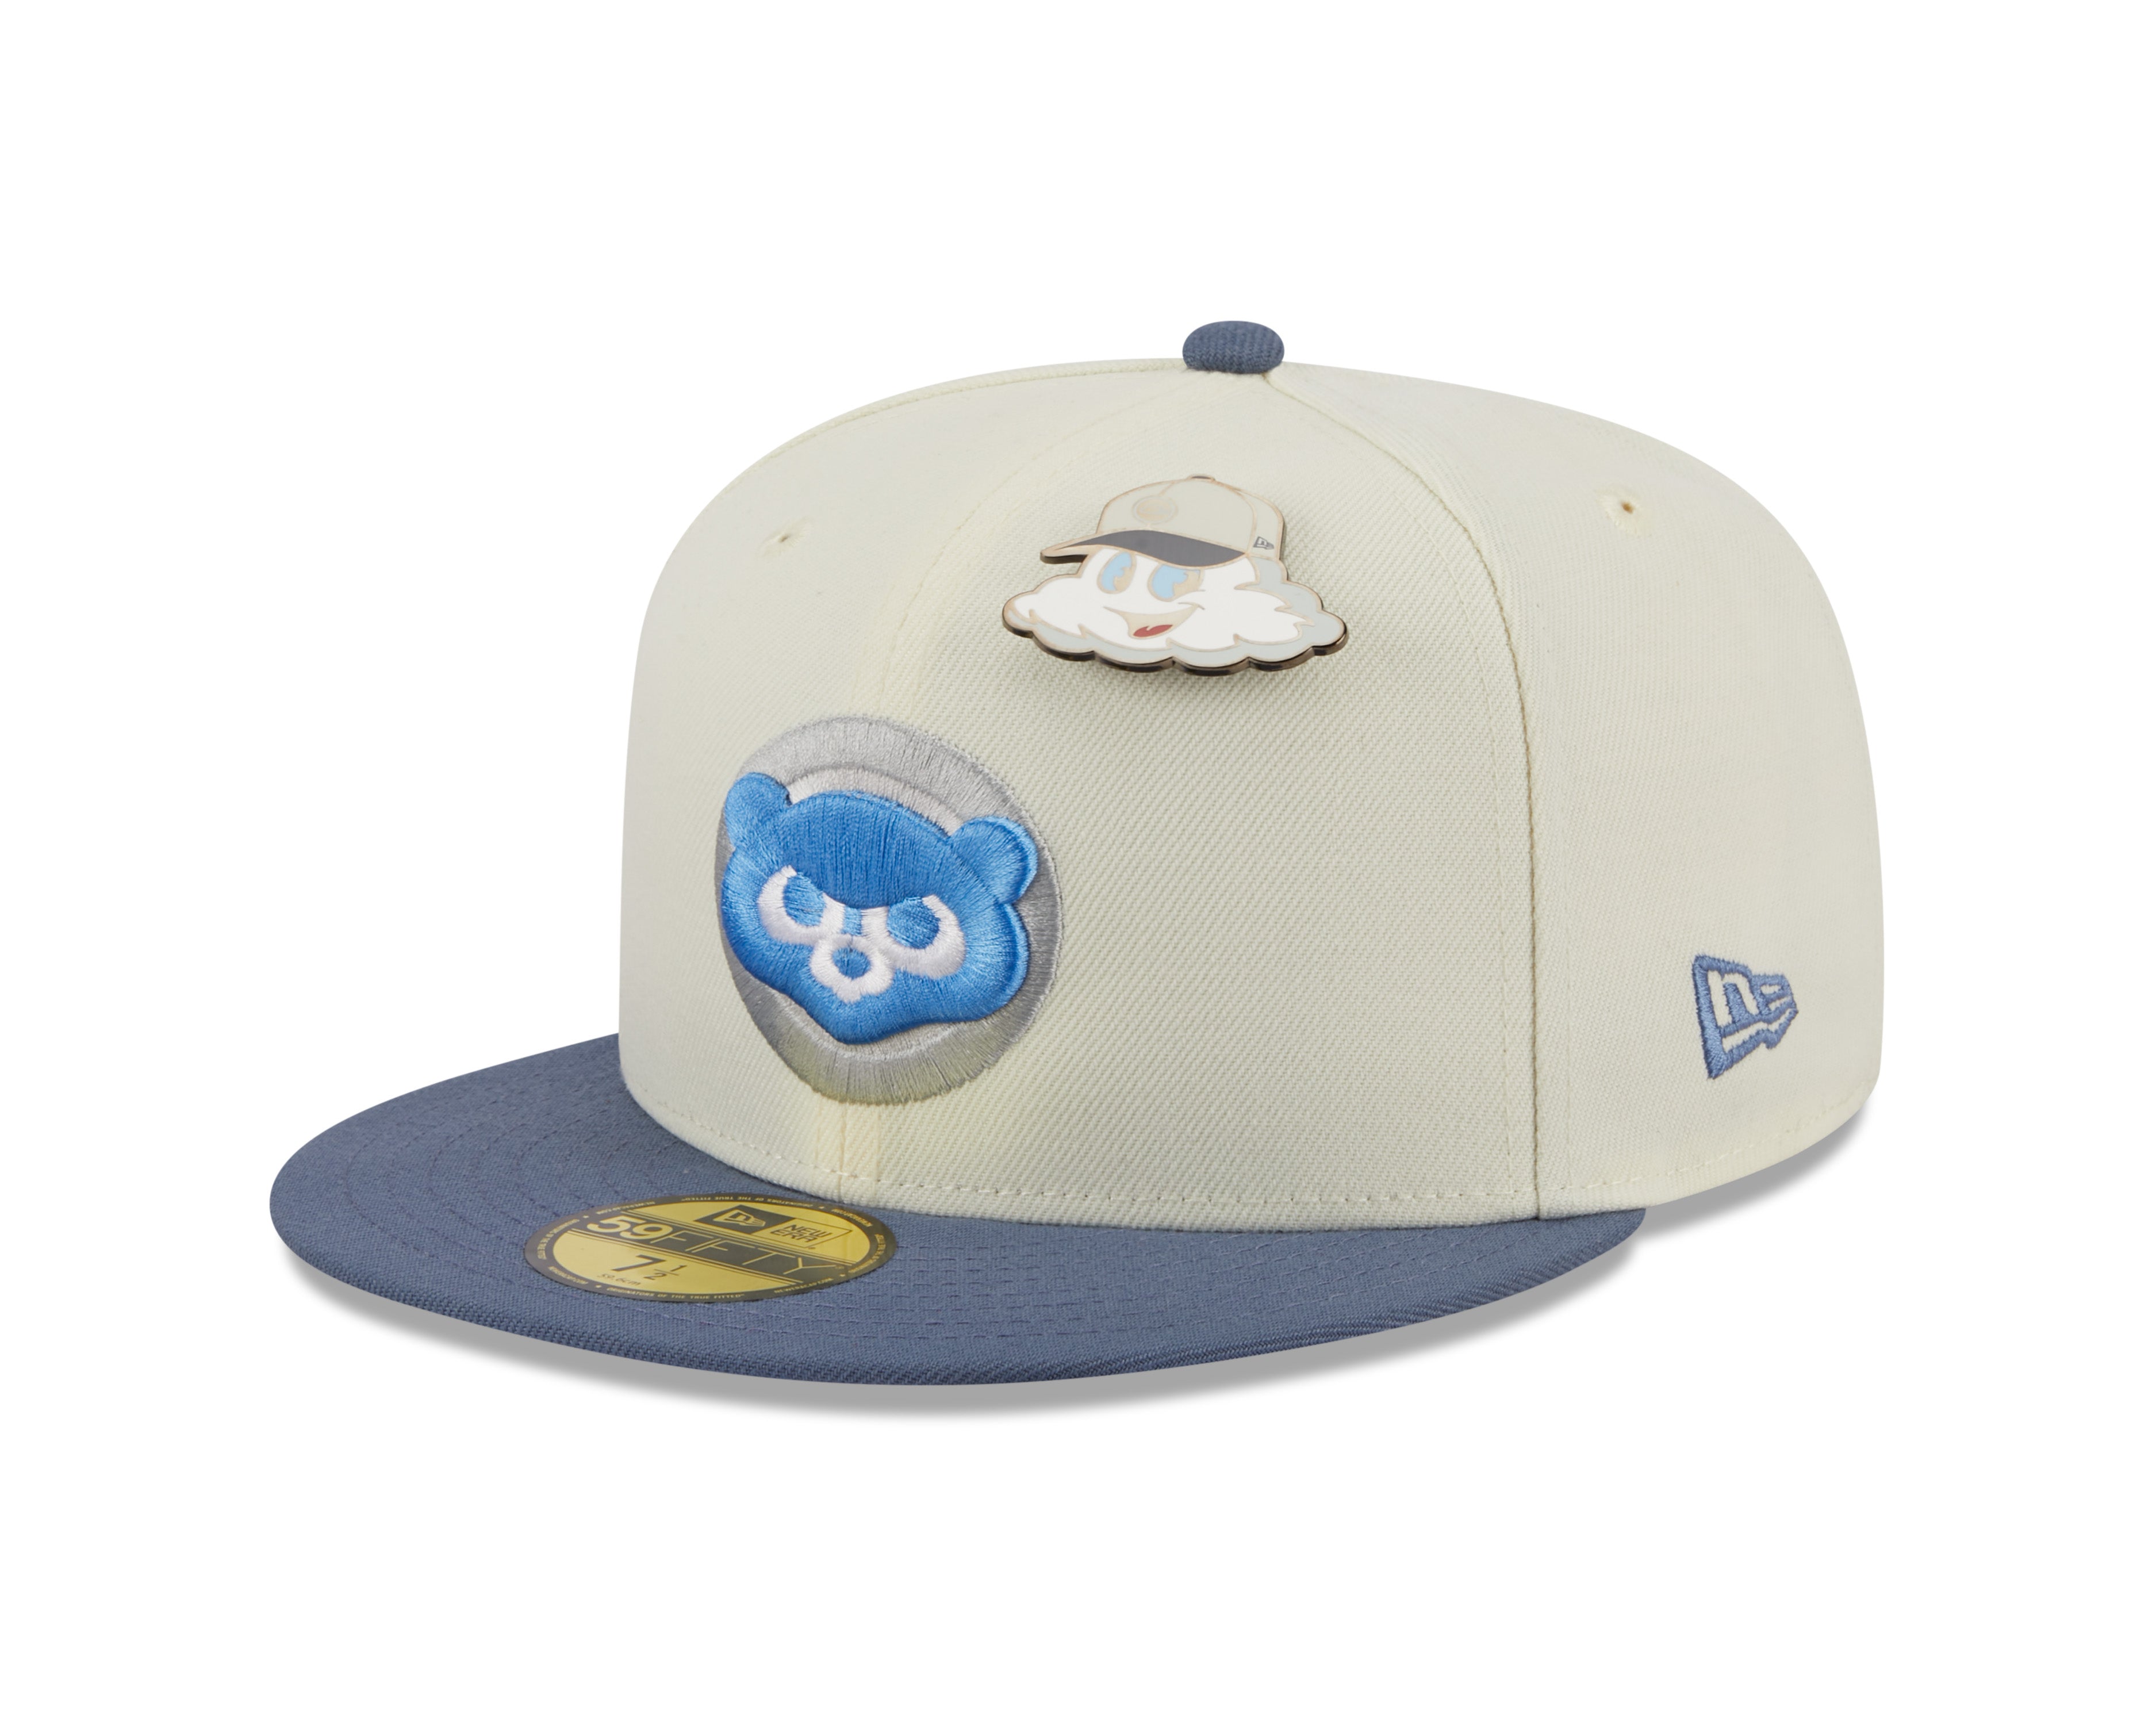 New Era 59fifty Fitted Cap Chicago Cubs Cooperstown THE ELEMENTS - Chrome White/Blue - Headz Up 